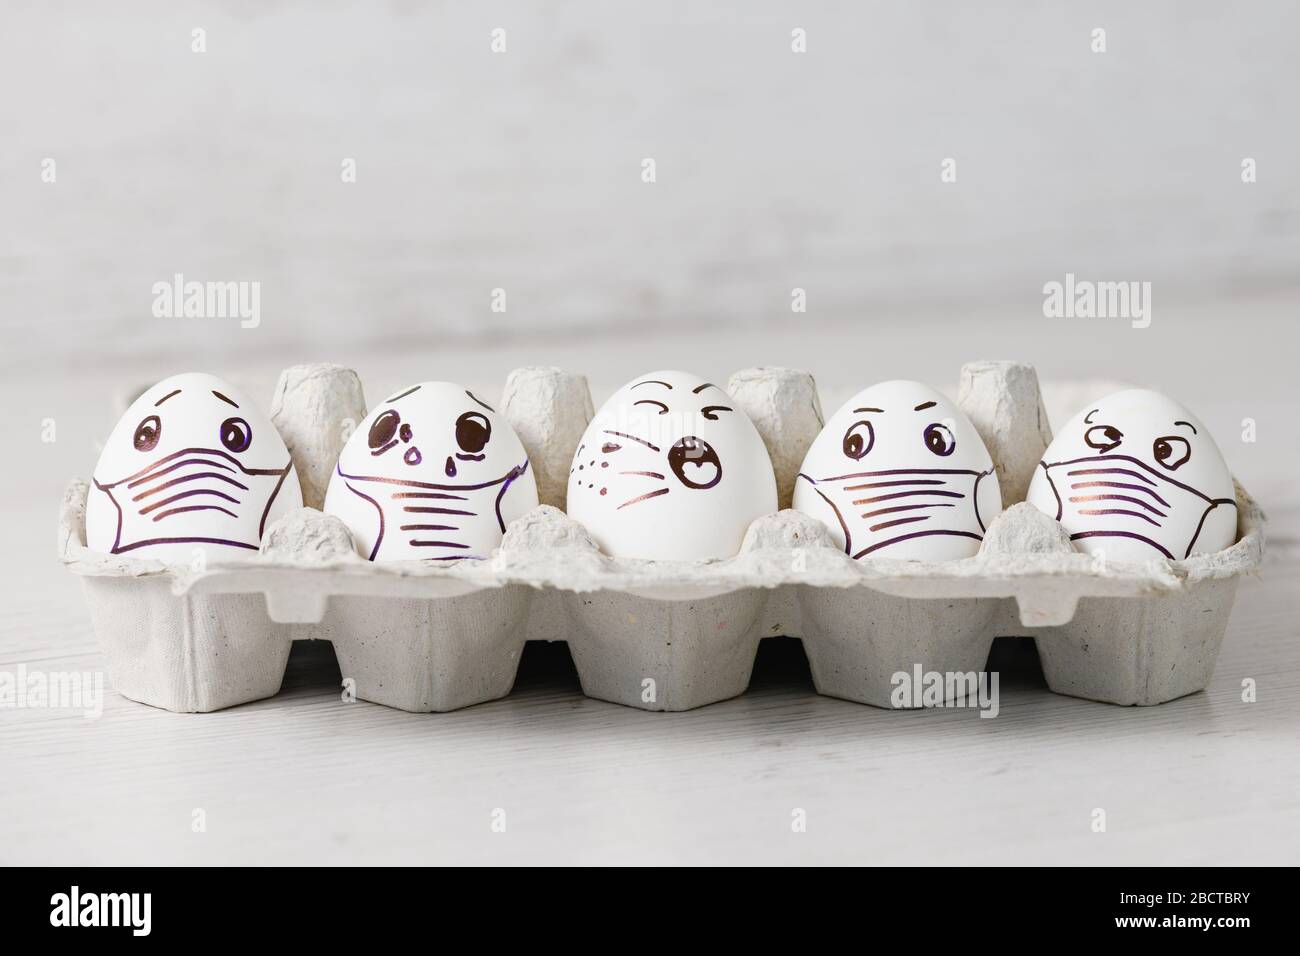 Five unhappy Easter holiday eggs in masks. Tray of white eggs with drawn funny desperate crying faces wearing medical masks at Easter holiday during c Stock Photo